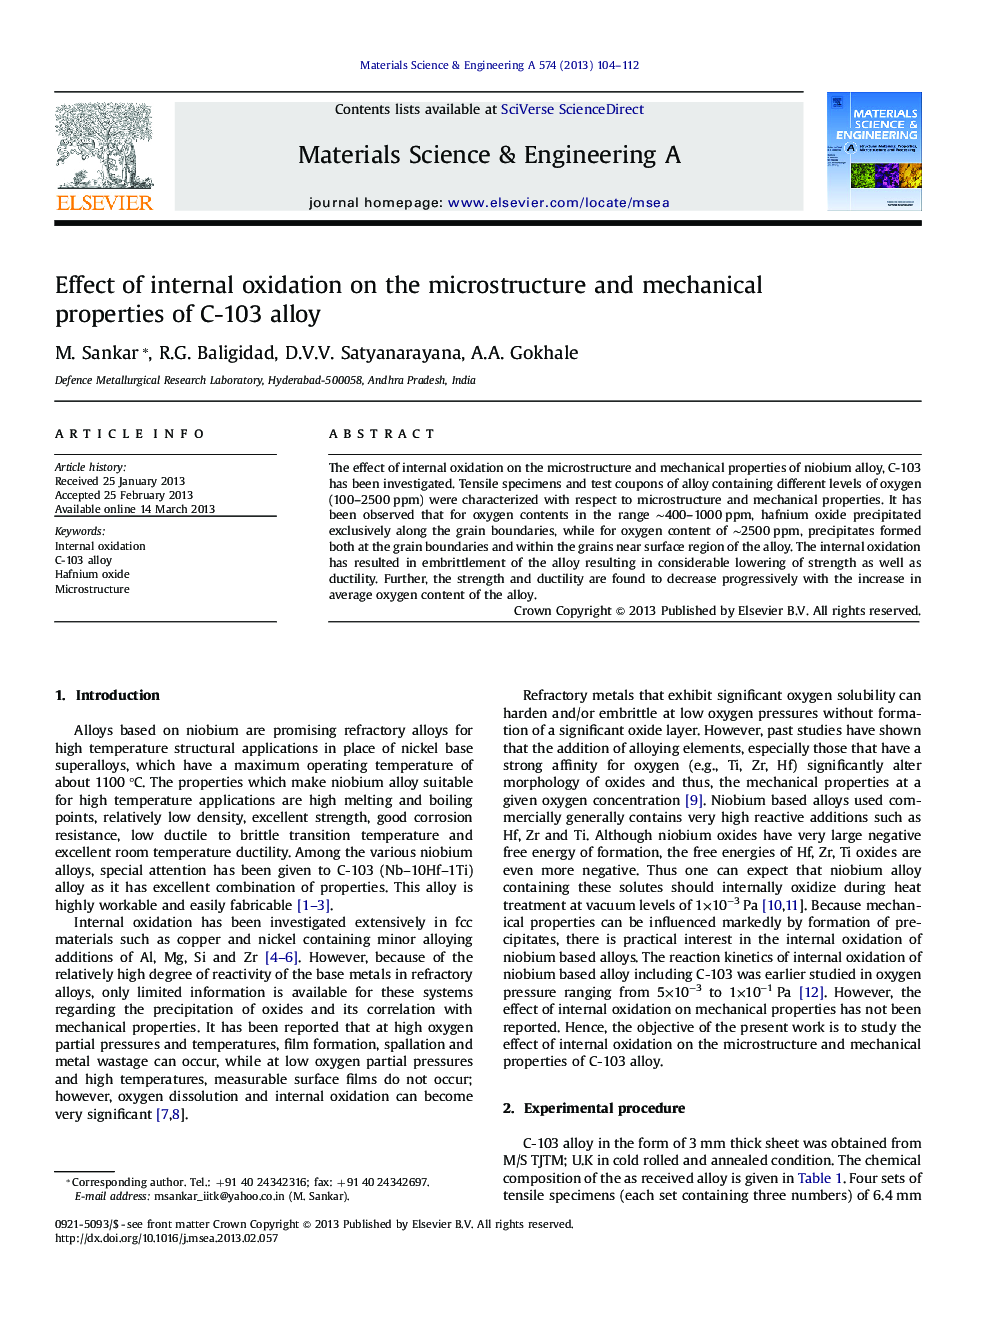 Effect of internal oxidation on the microstructure and mechanical properties of C-103 alloy